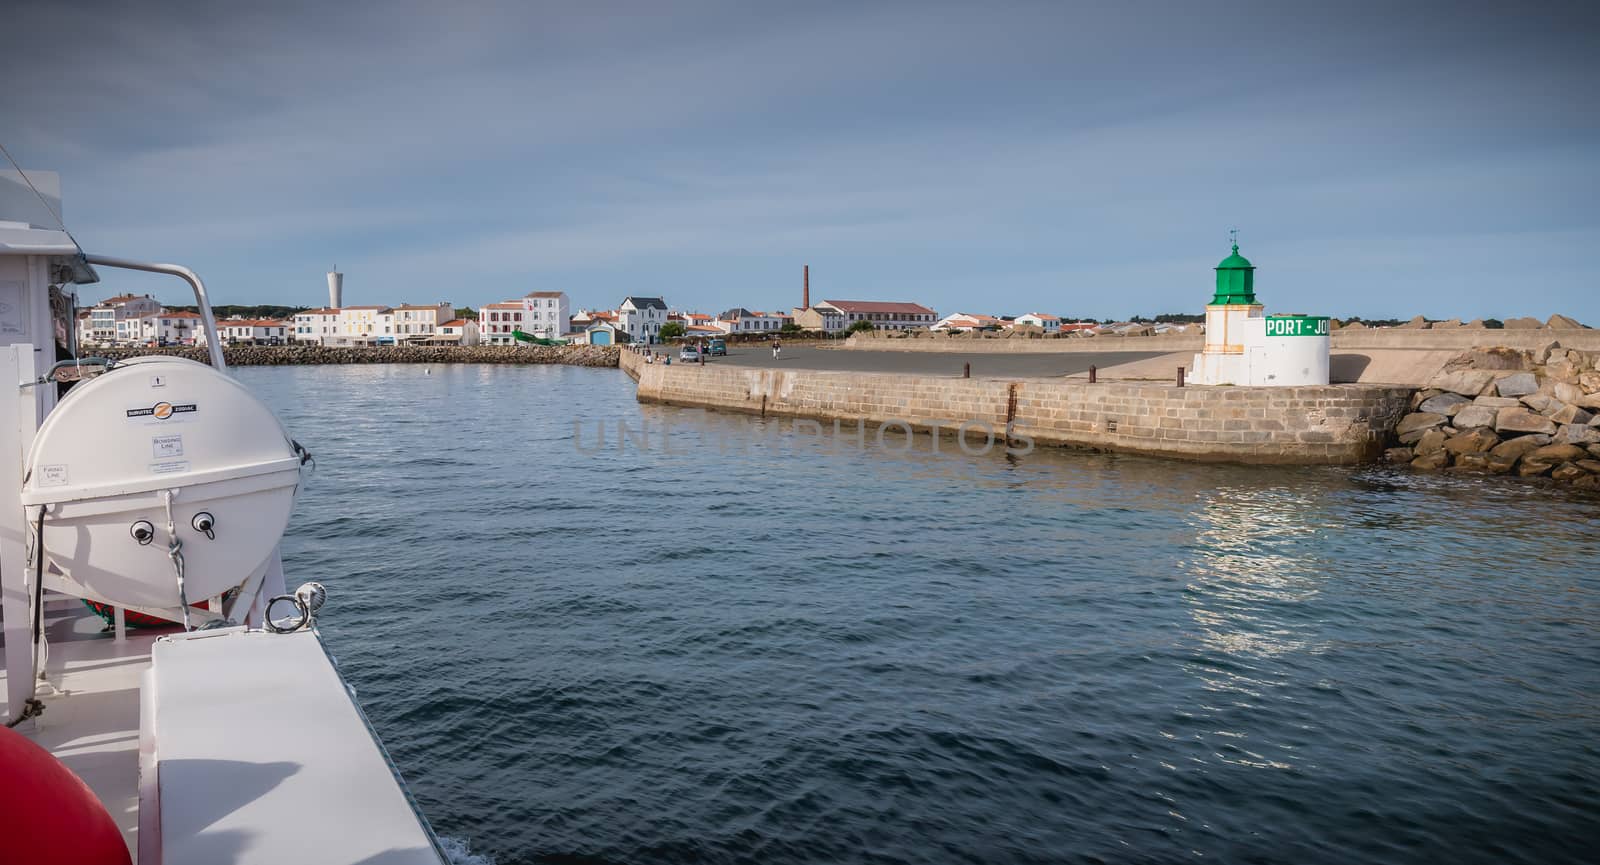 View of the bridge of a ferry that enters the harbor of the isla by AtlanticEUROSTOXX